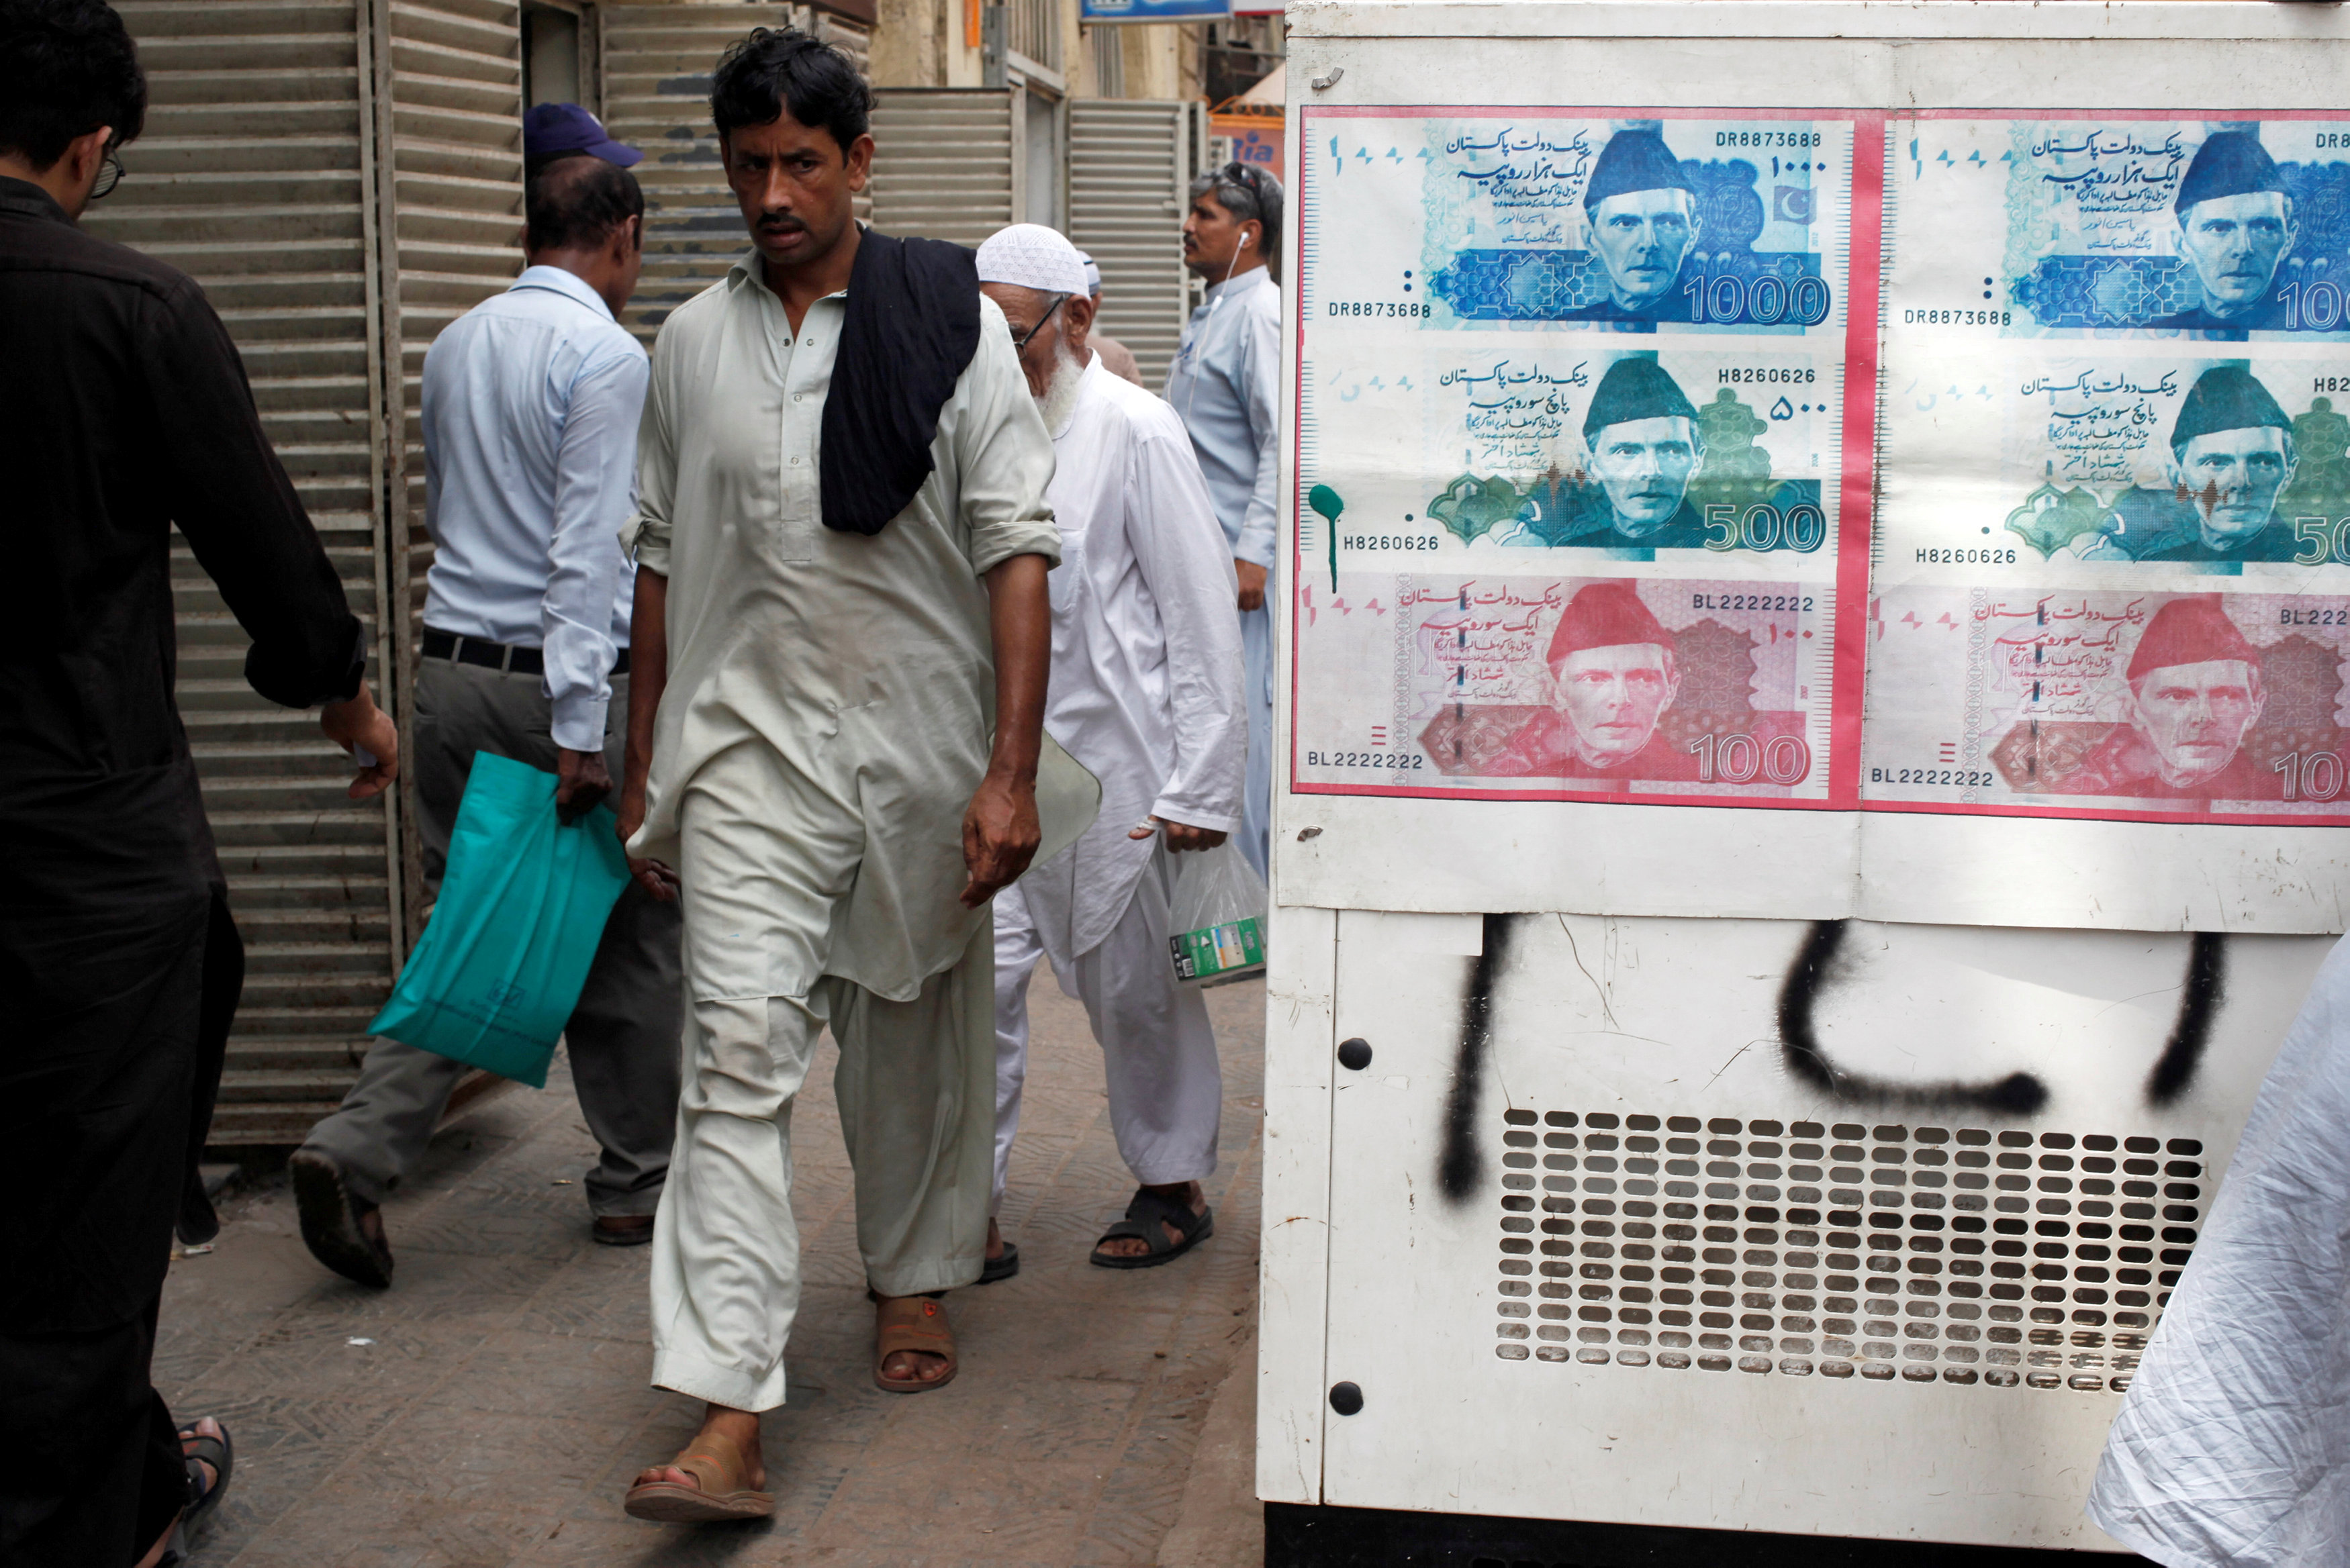 Passersby walk past an advertisement board with photos of Pakistani rupee at a money exchange along a sidewalk in Karachi